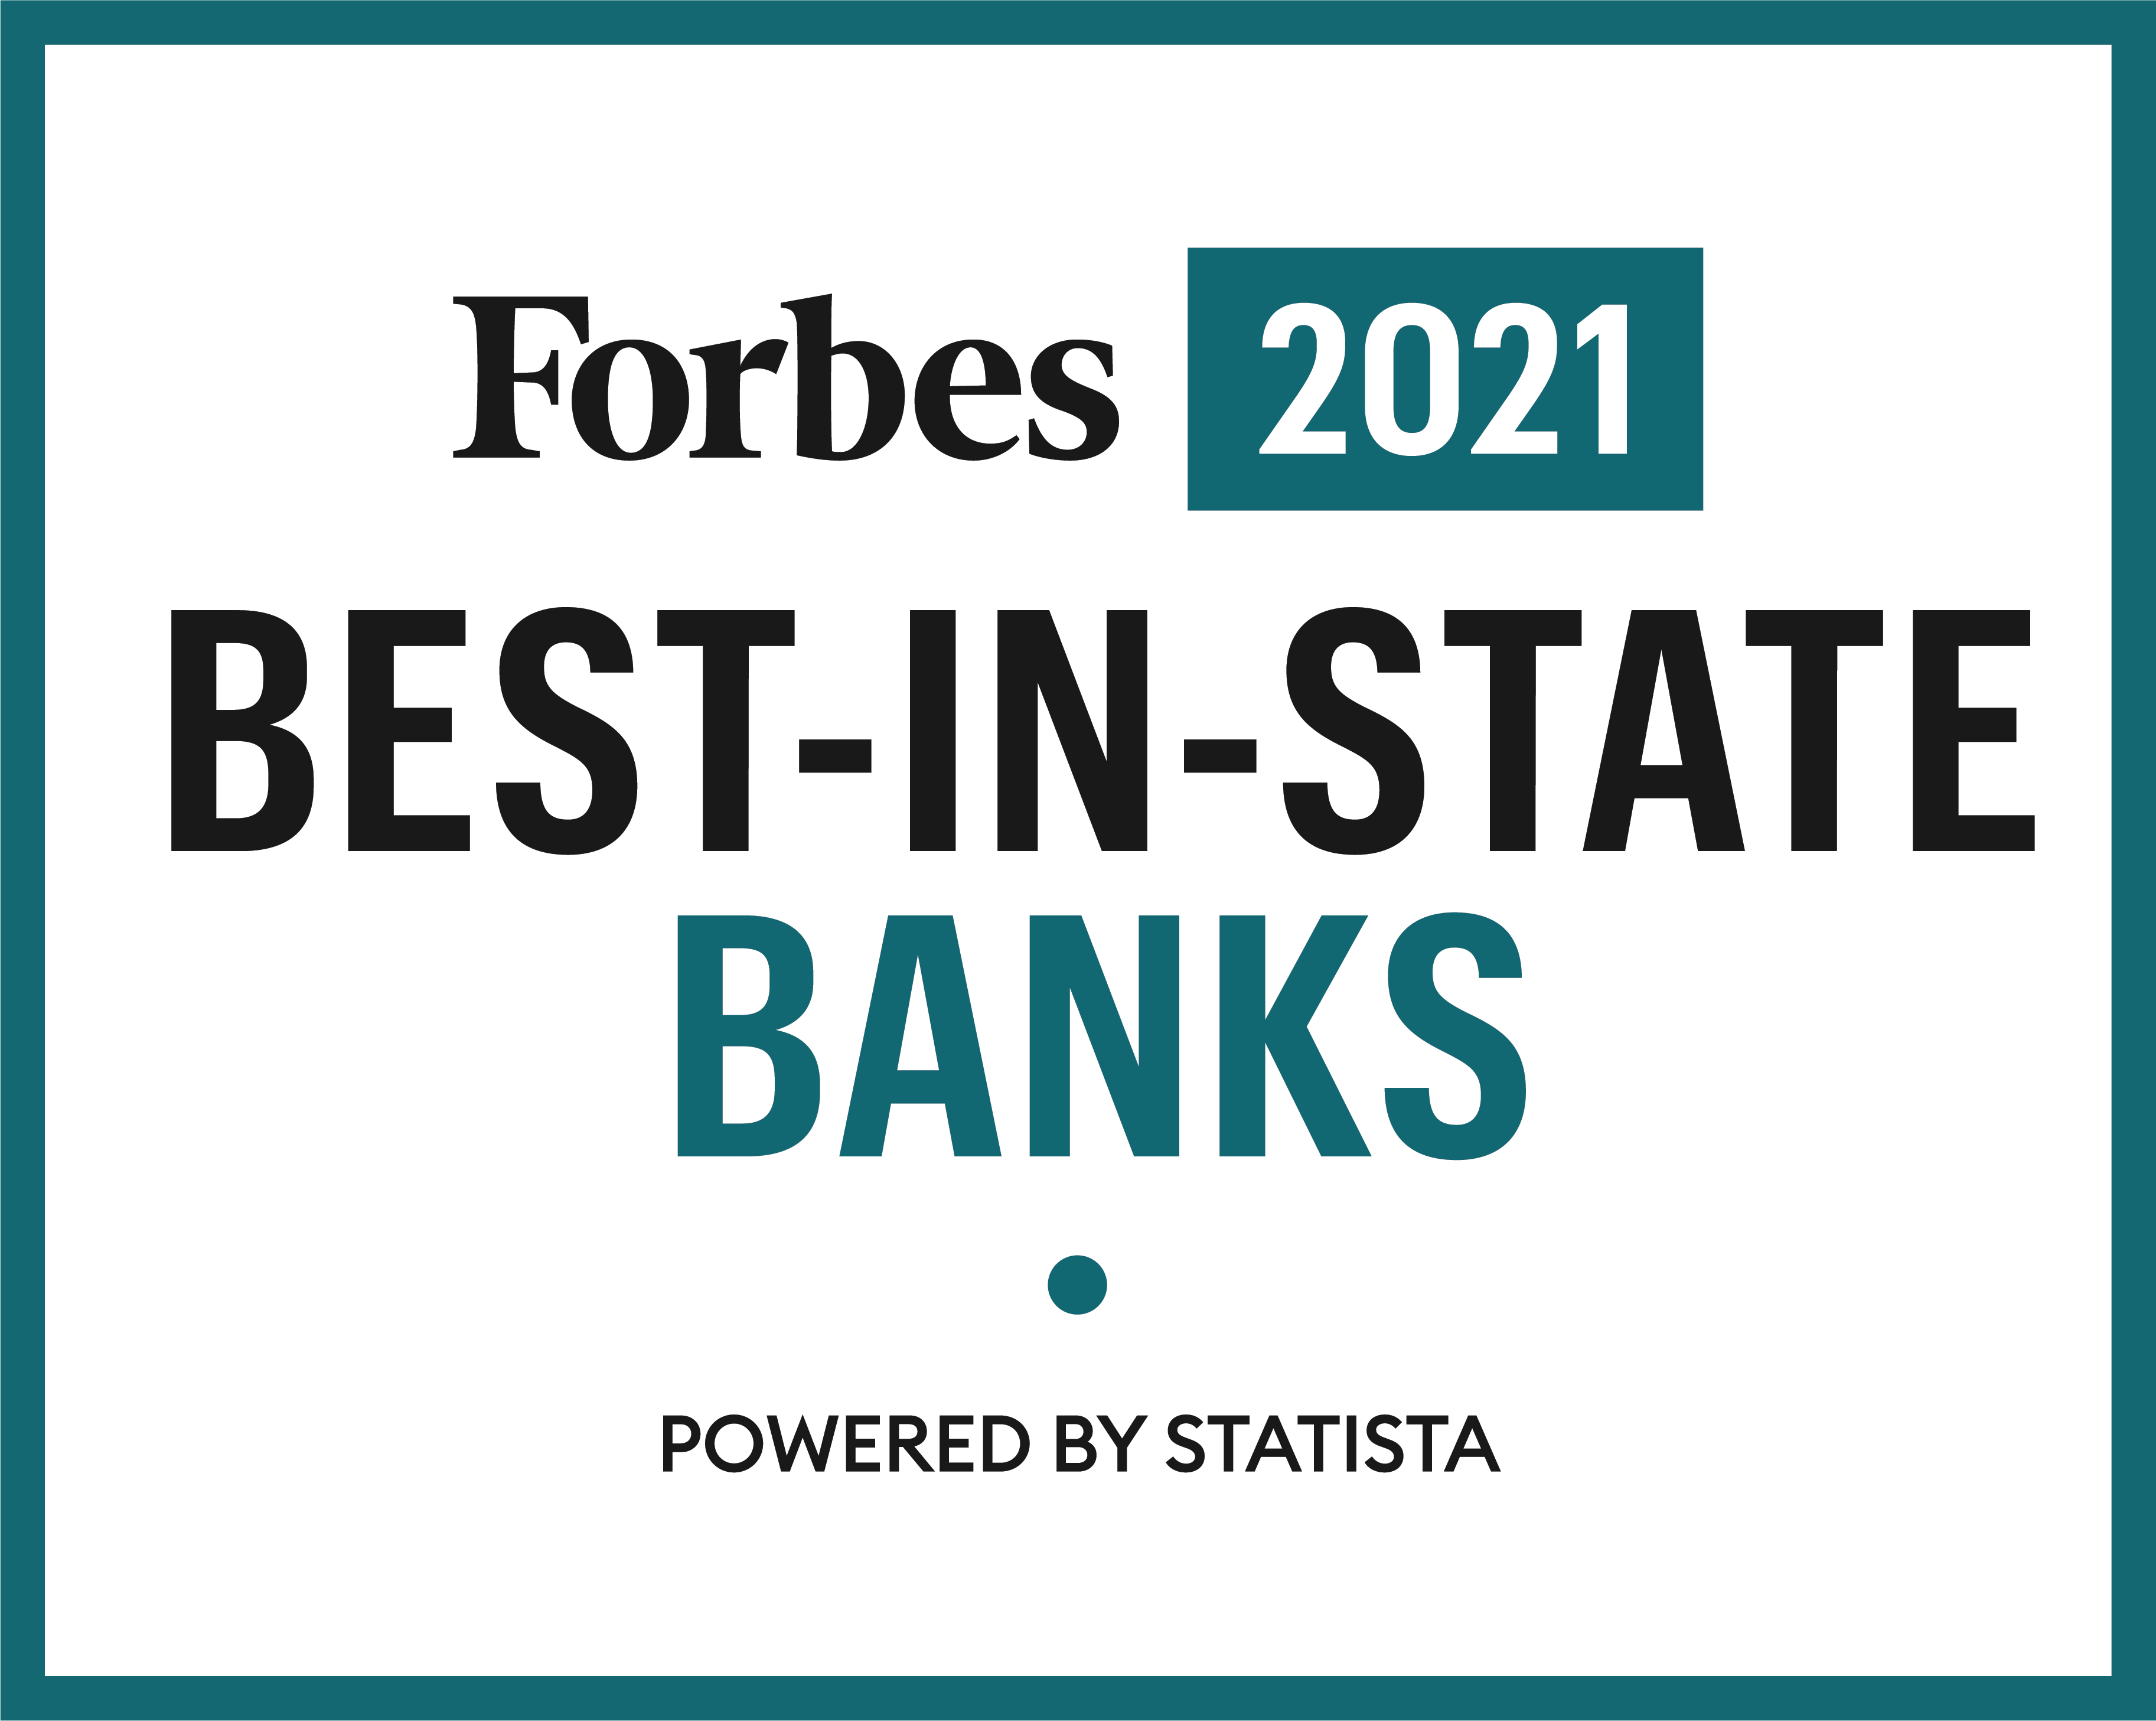 Forbes 2021 - Best-in-State Banks